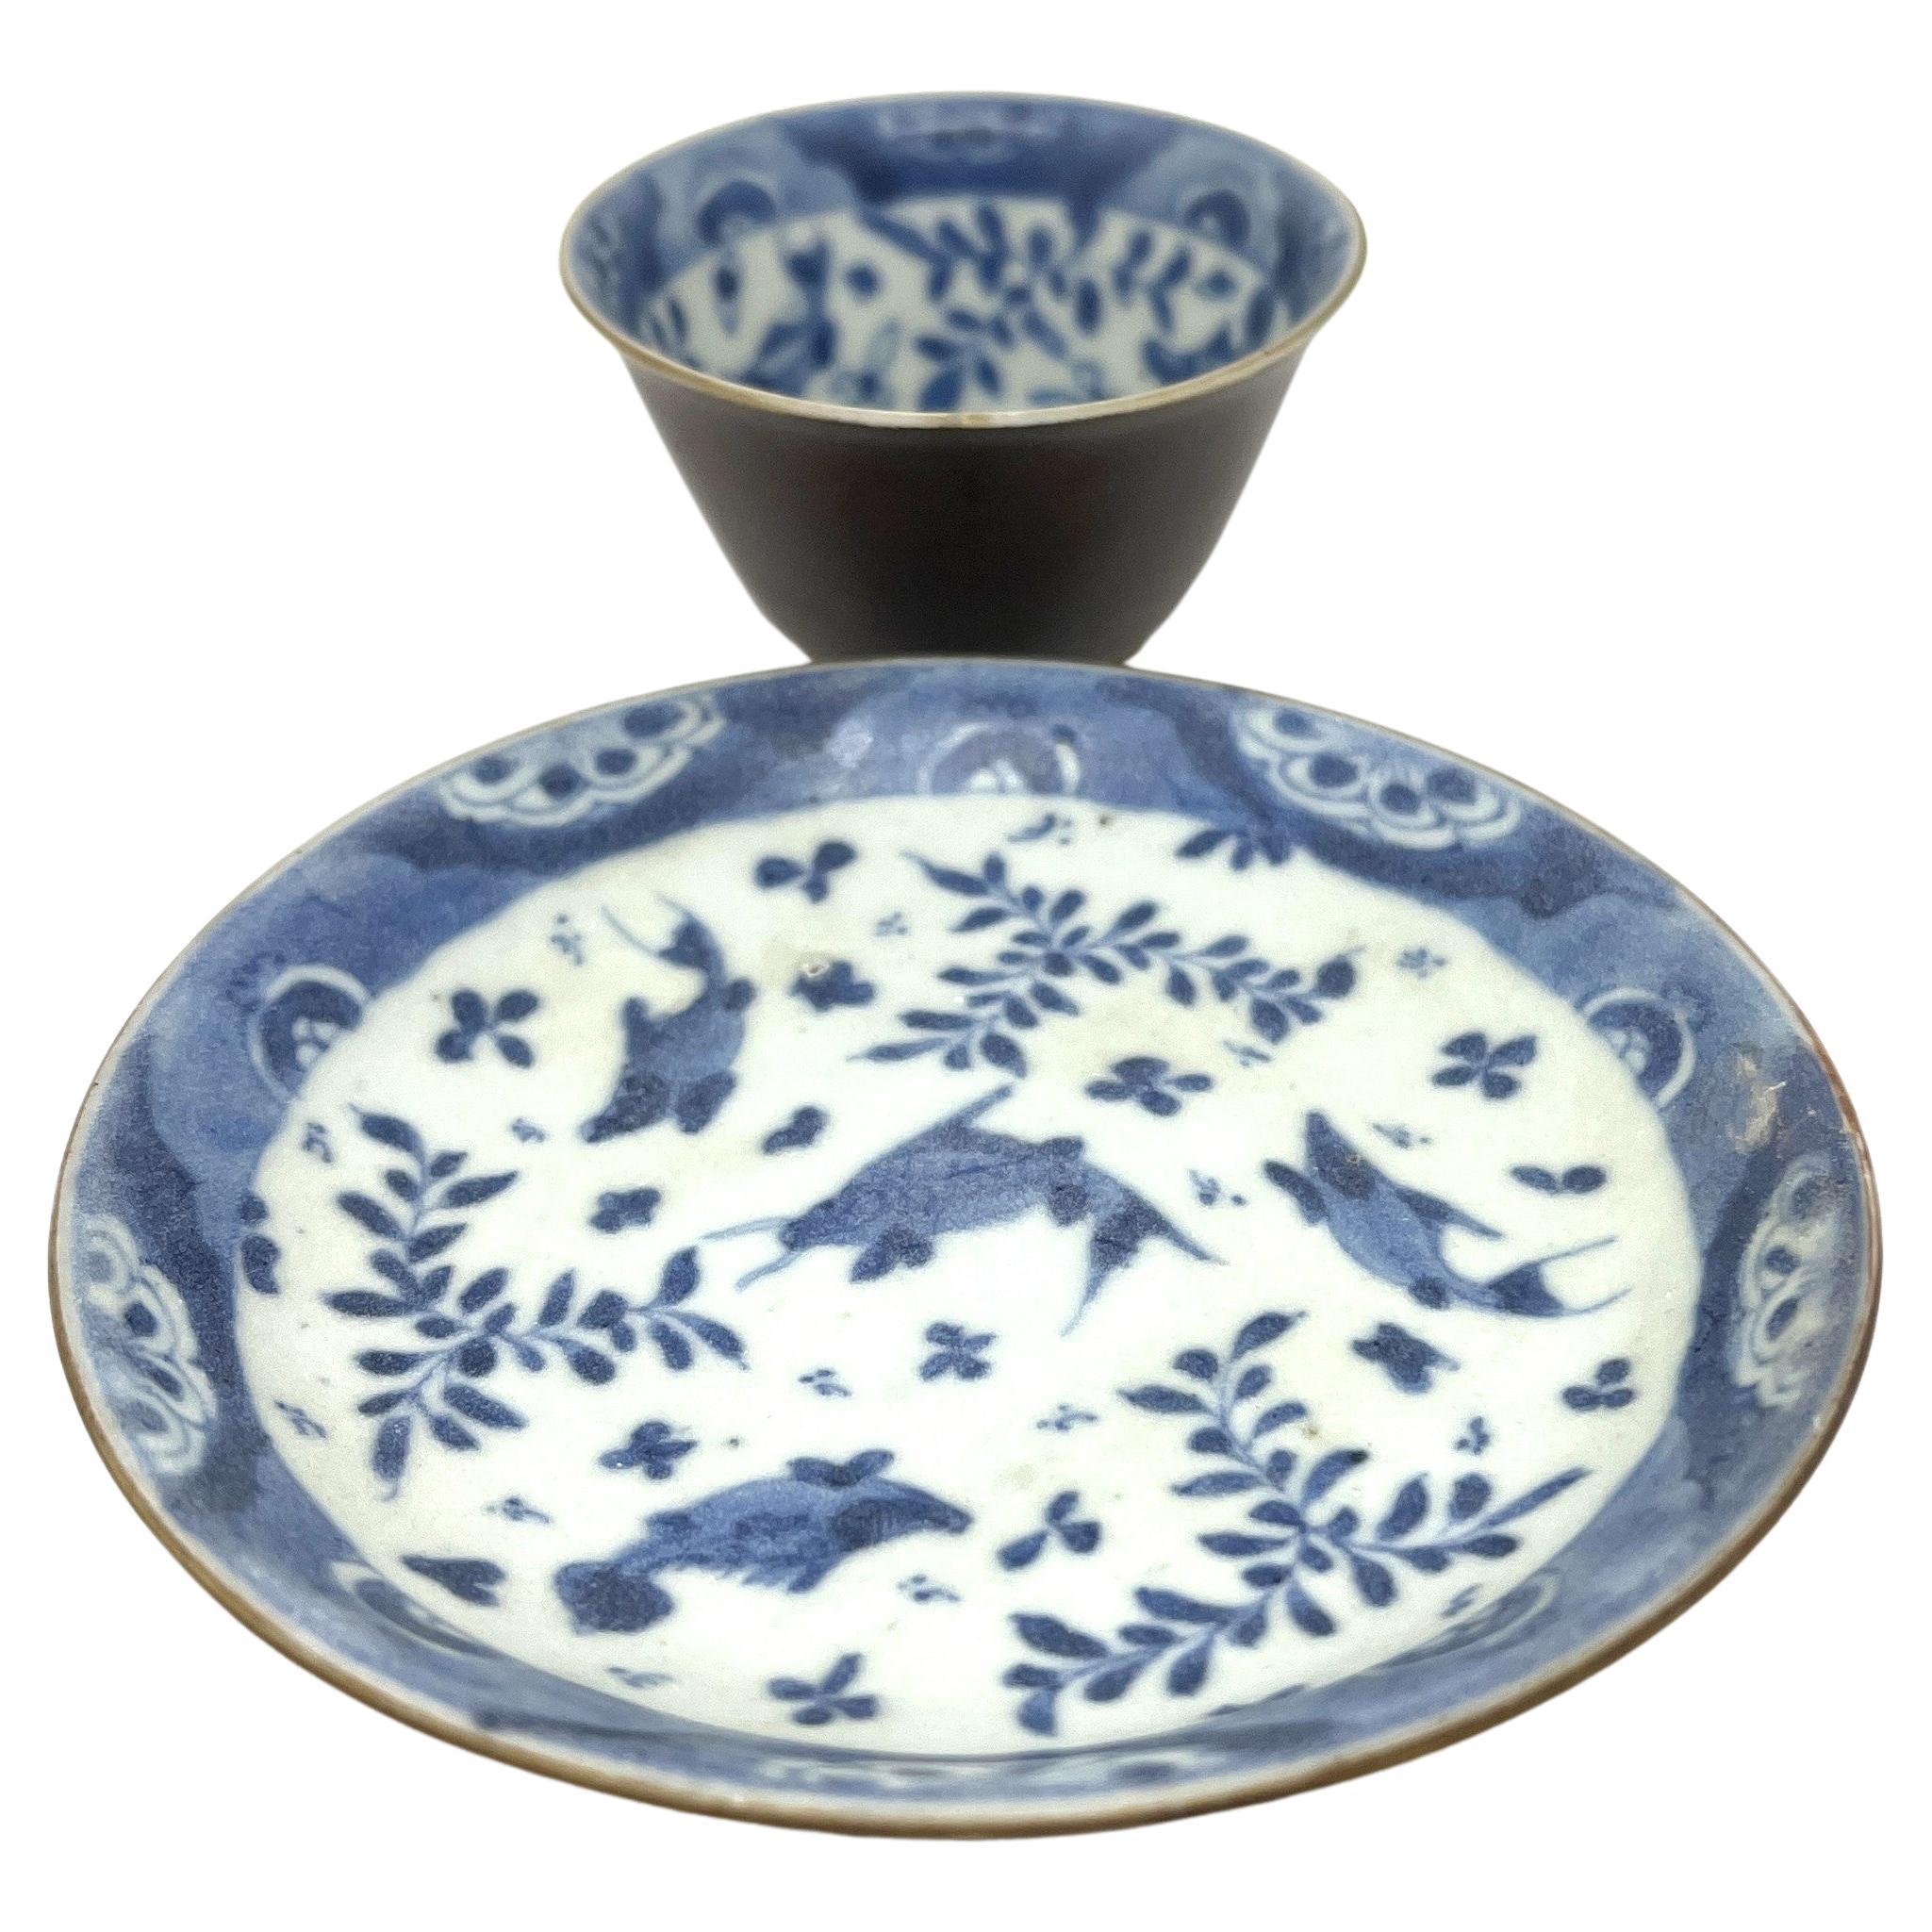 Fish and Waterweed Teabowl and Saucer Set, c 1725, Qing Dynasty, Yongzheng era For Sale